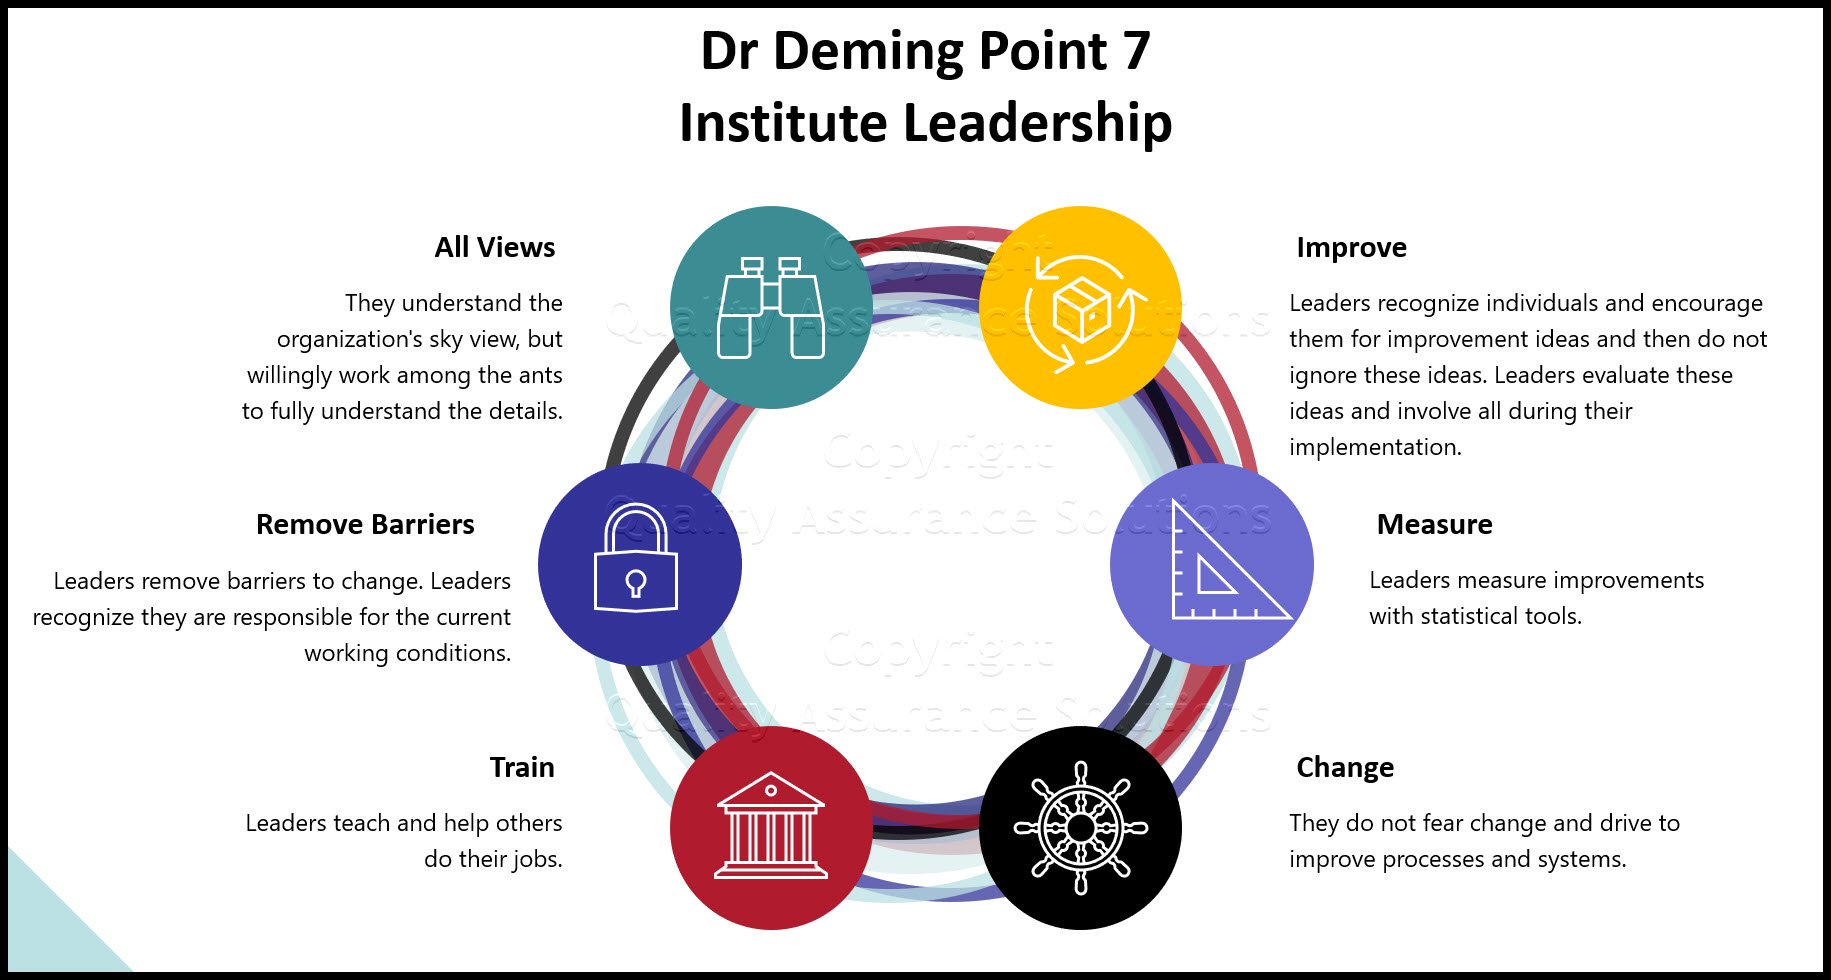 Learn Dr Deming Point 7 - Institute Leadership. Article discusses important leadership attributes.